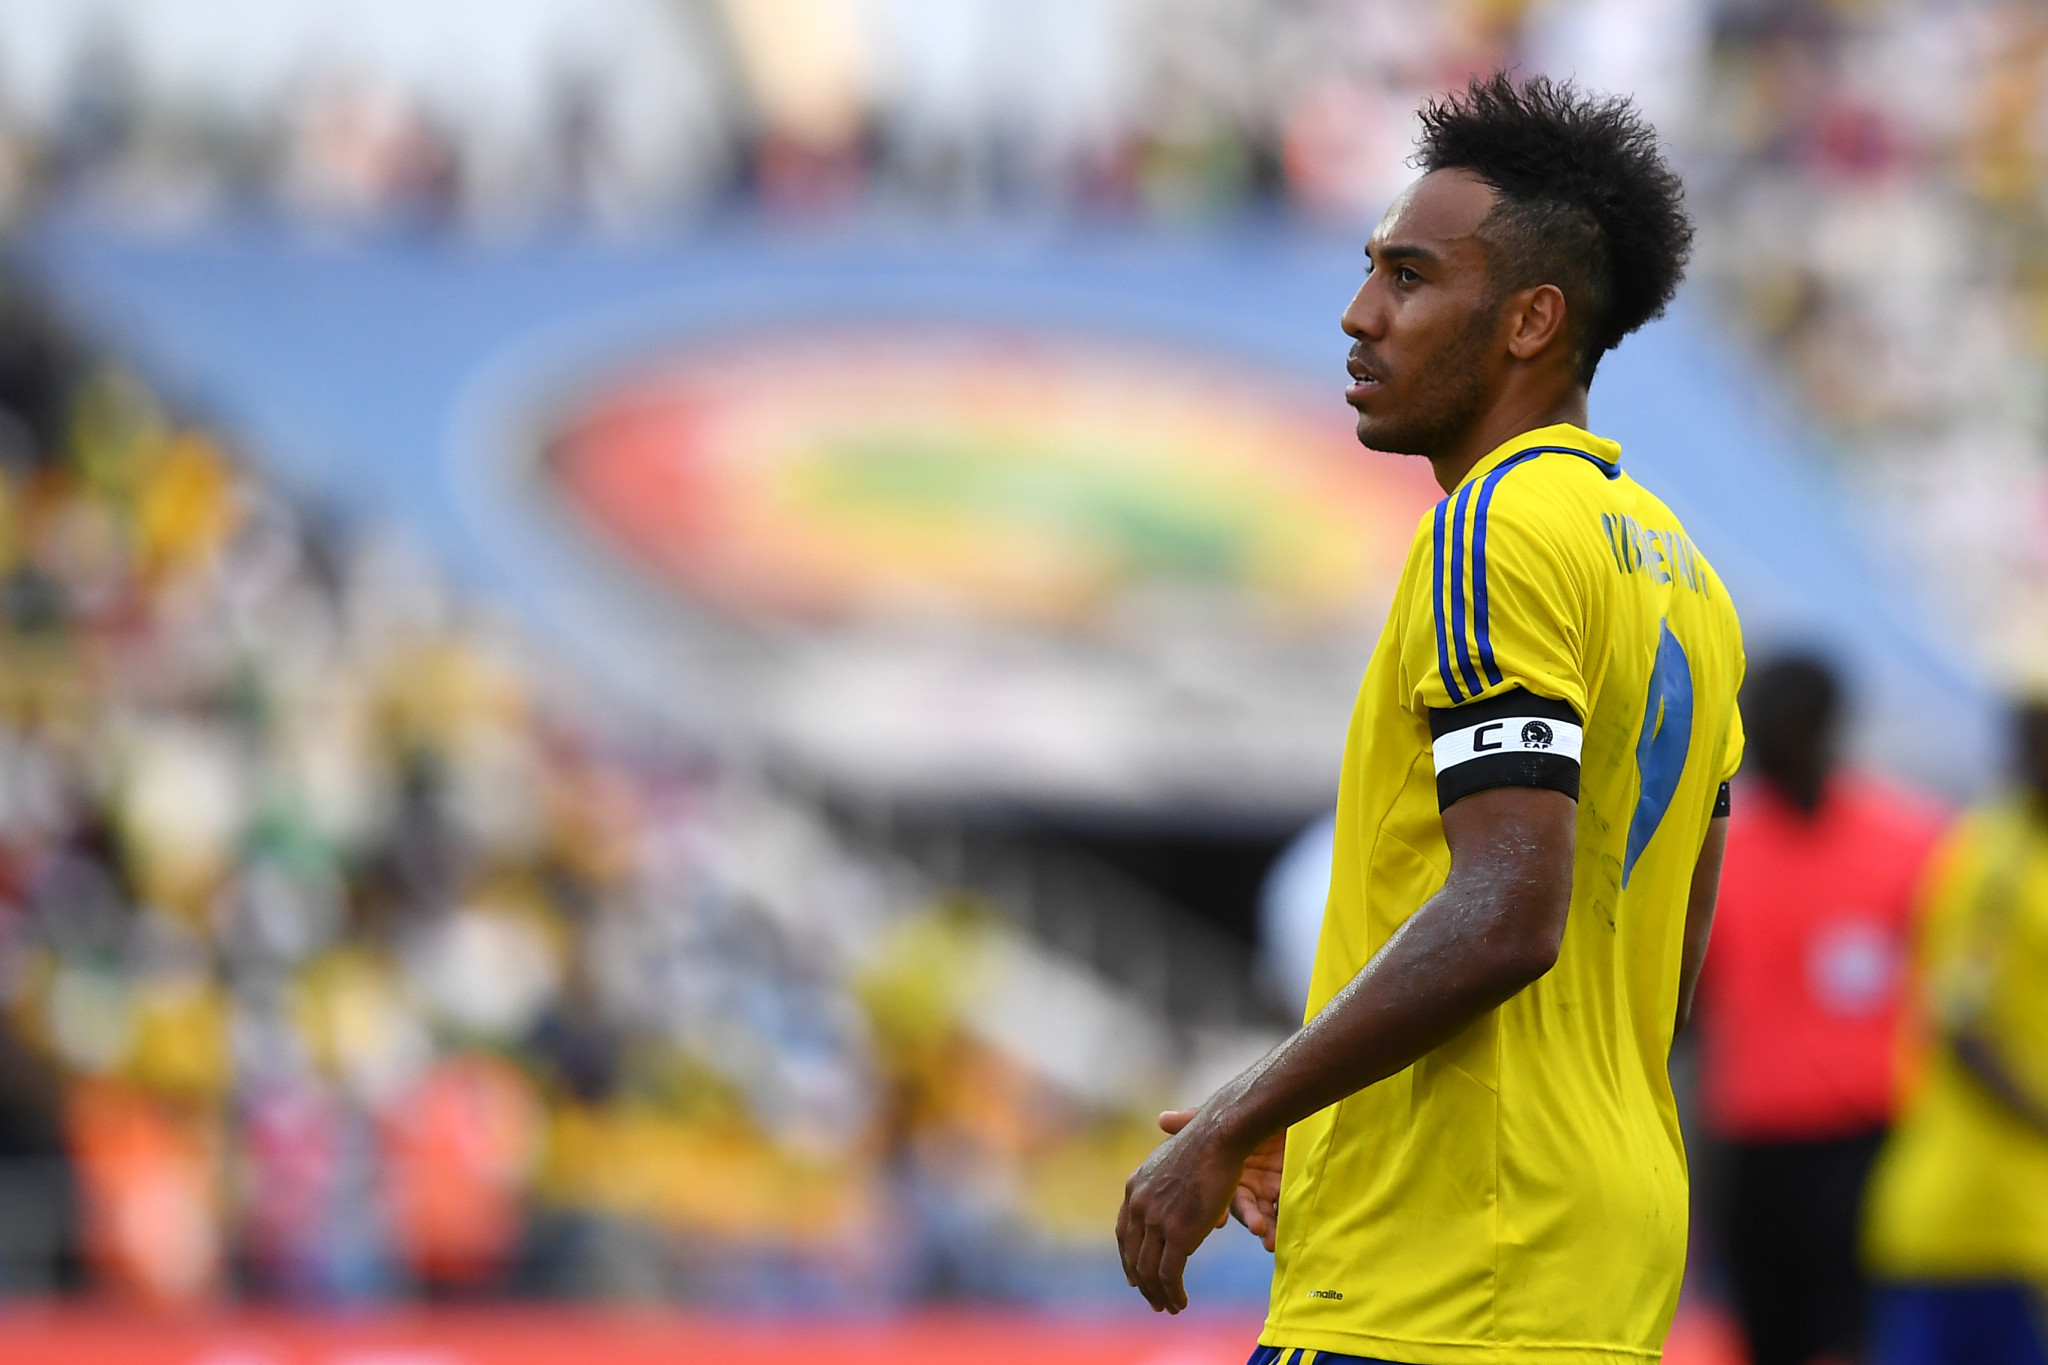 Aubameyang fined by CAF for "offensive and degrading" social media posts